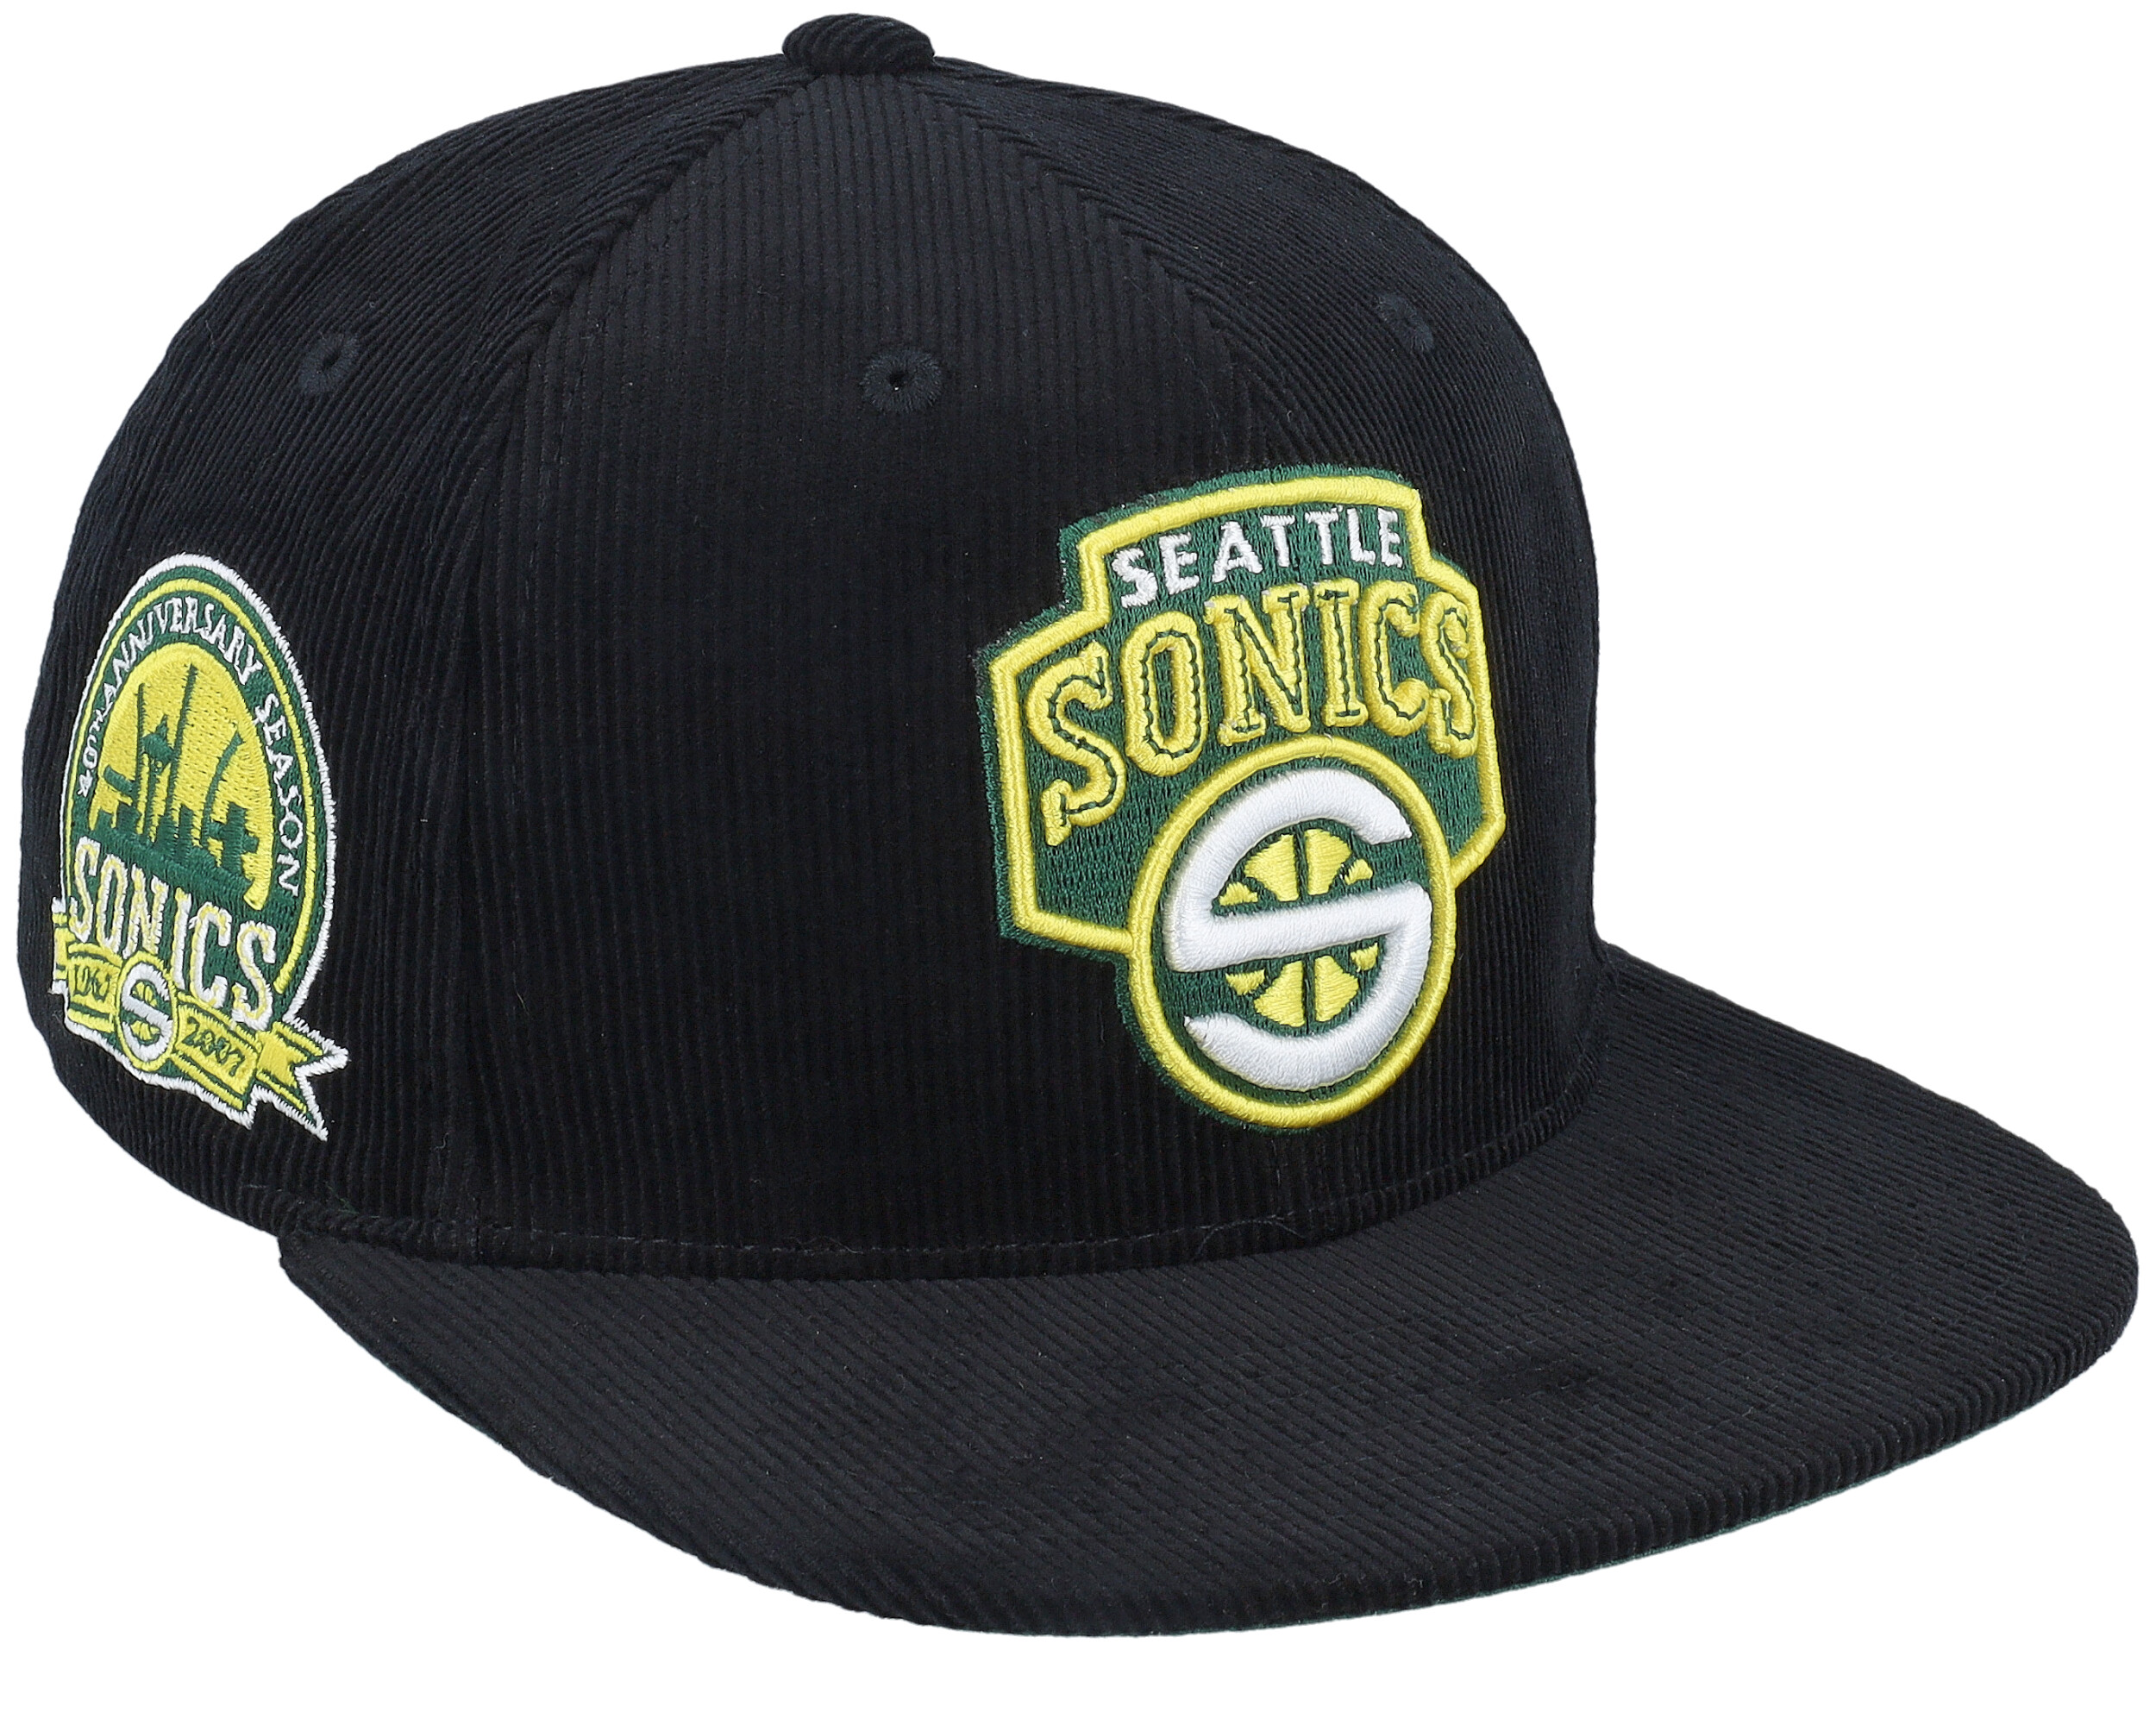 Official Seattle SuperSonics Hats, Snapbacks, Fitted Hats, Beanies